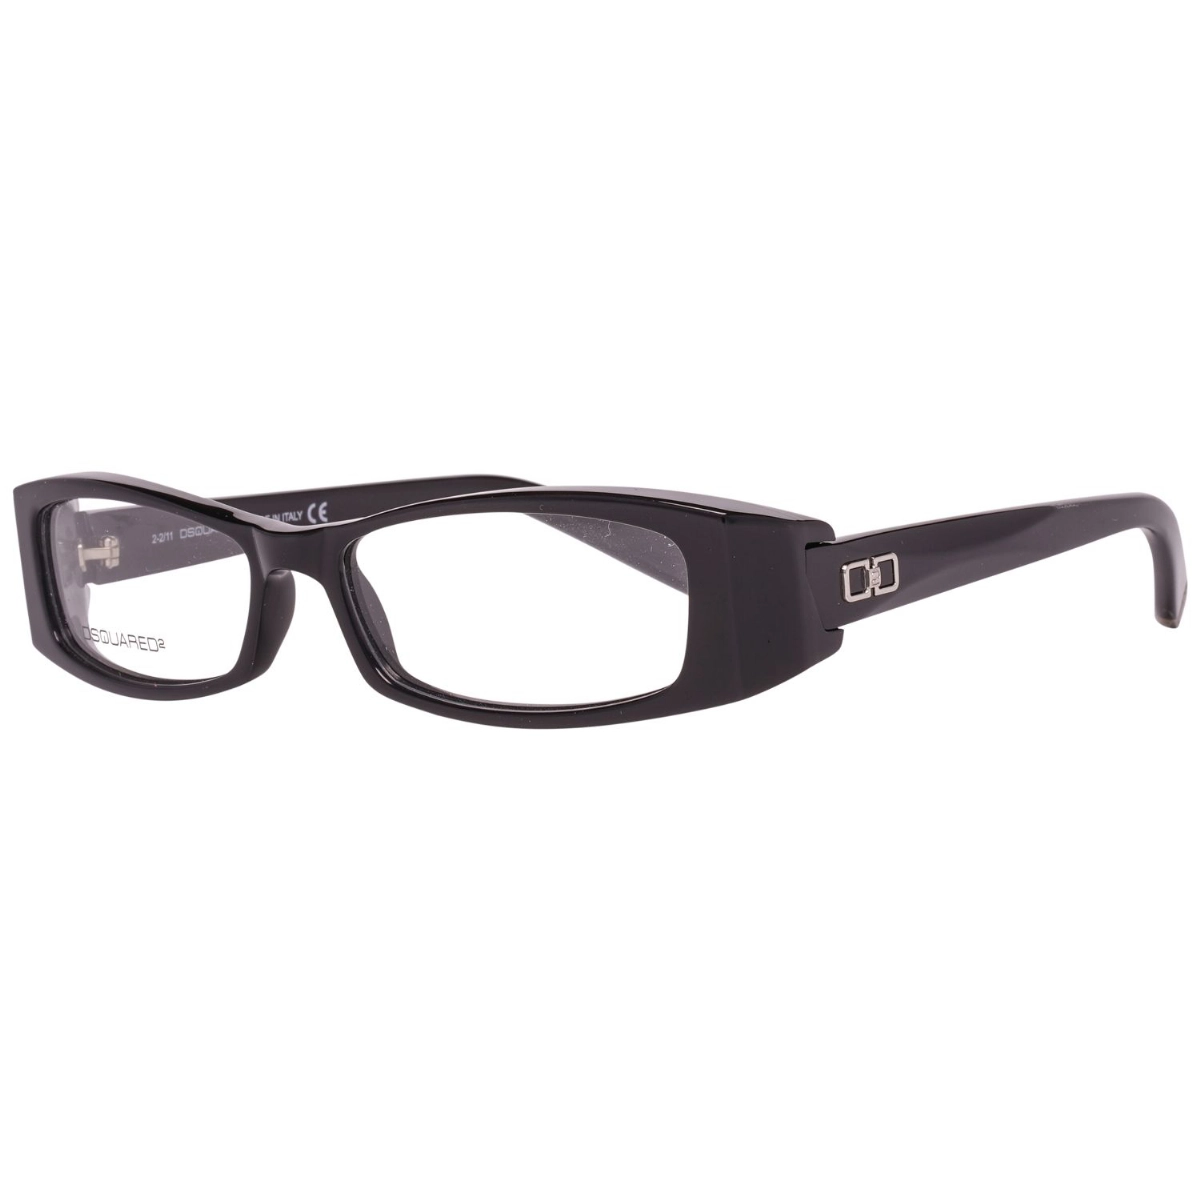 GLASSES FOR WOMAN DSQUARED2 DQ5020-001-51